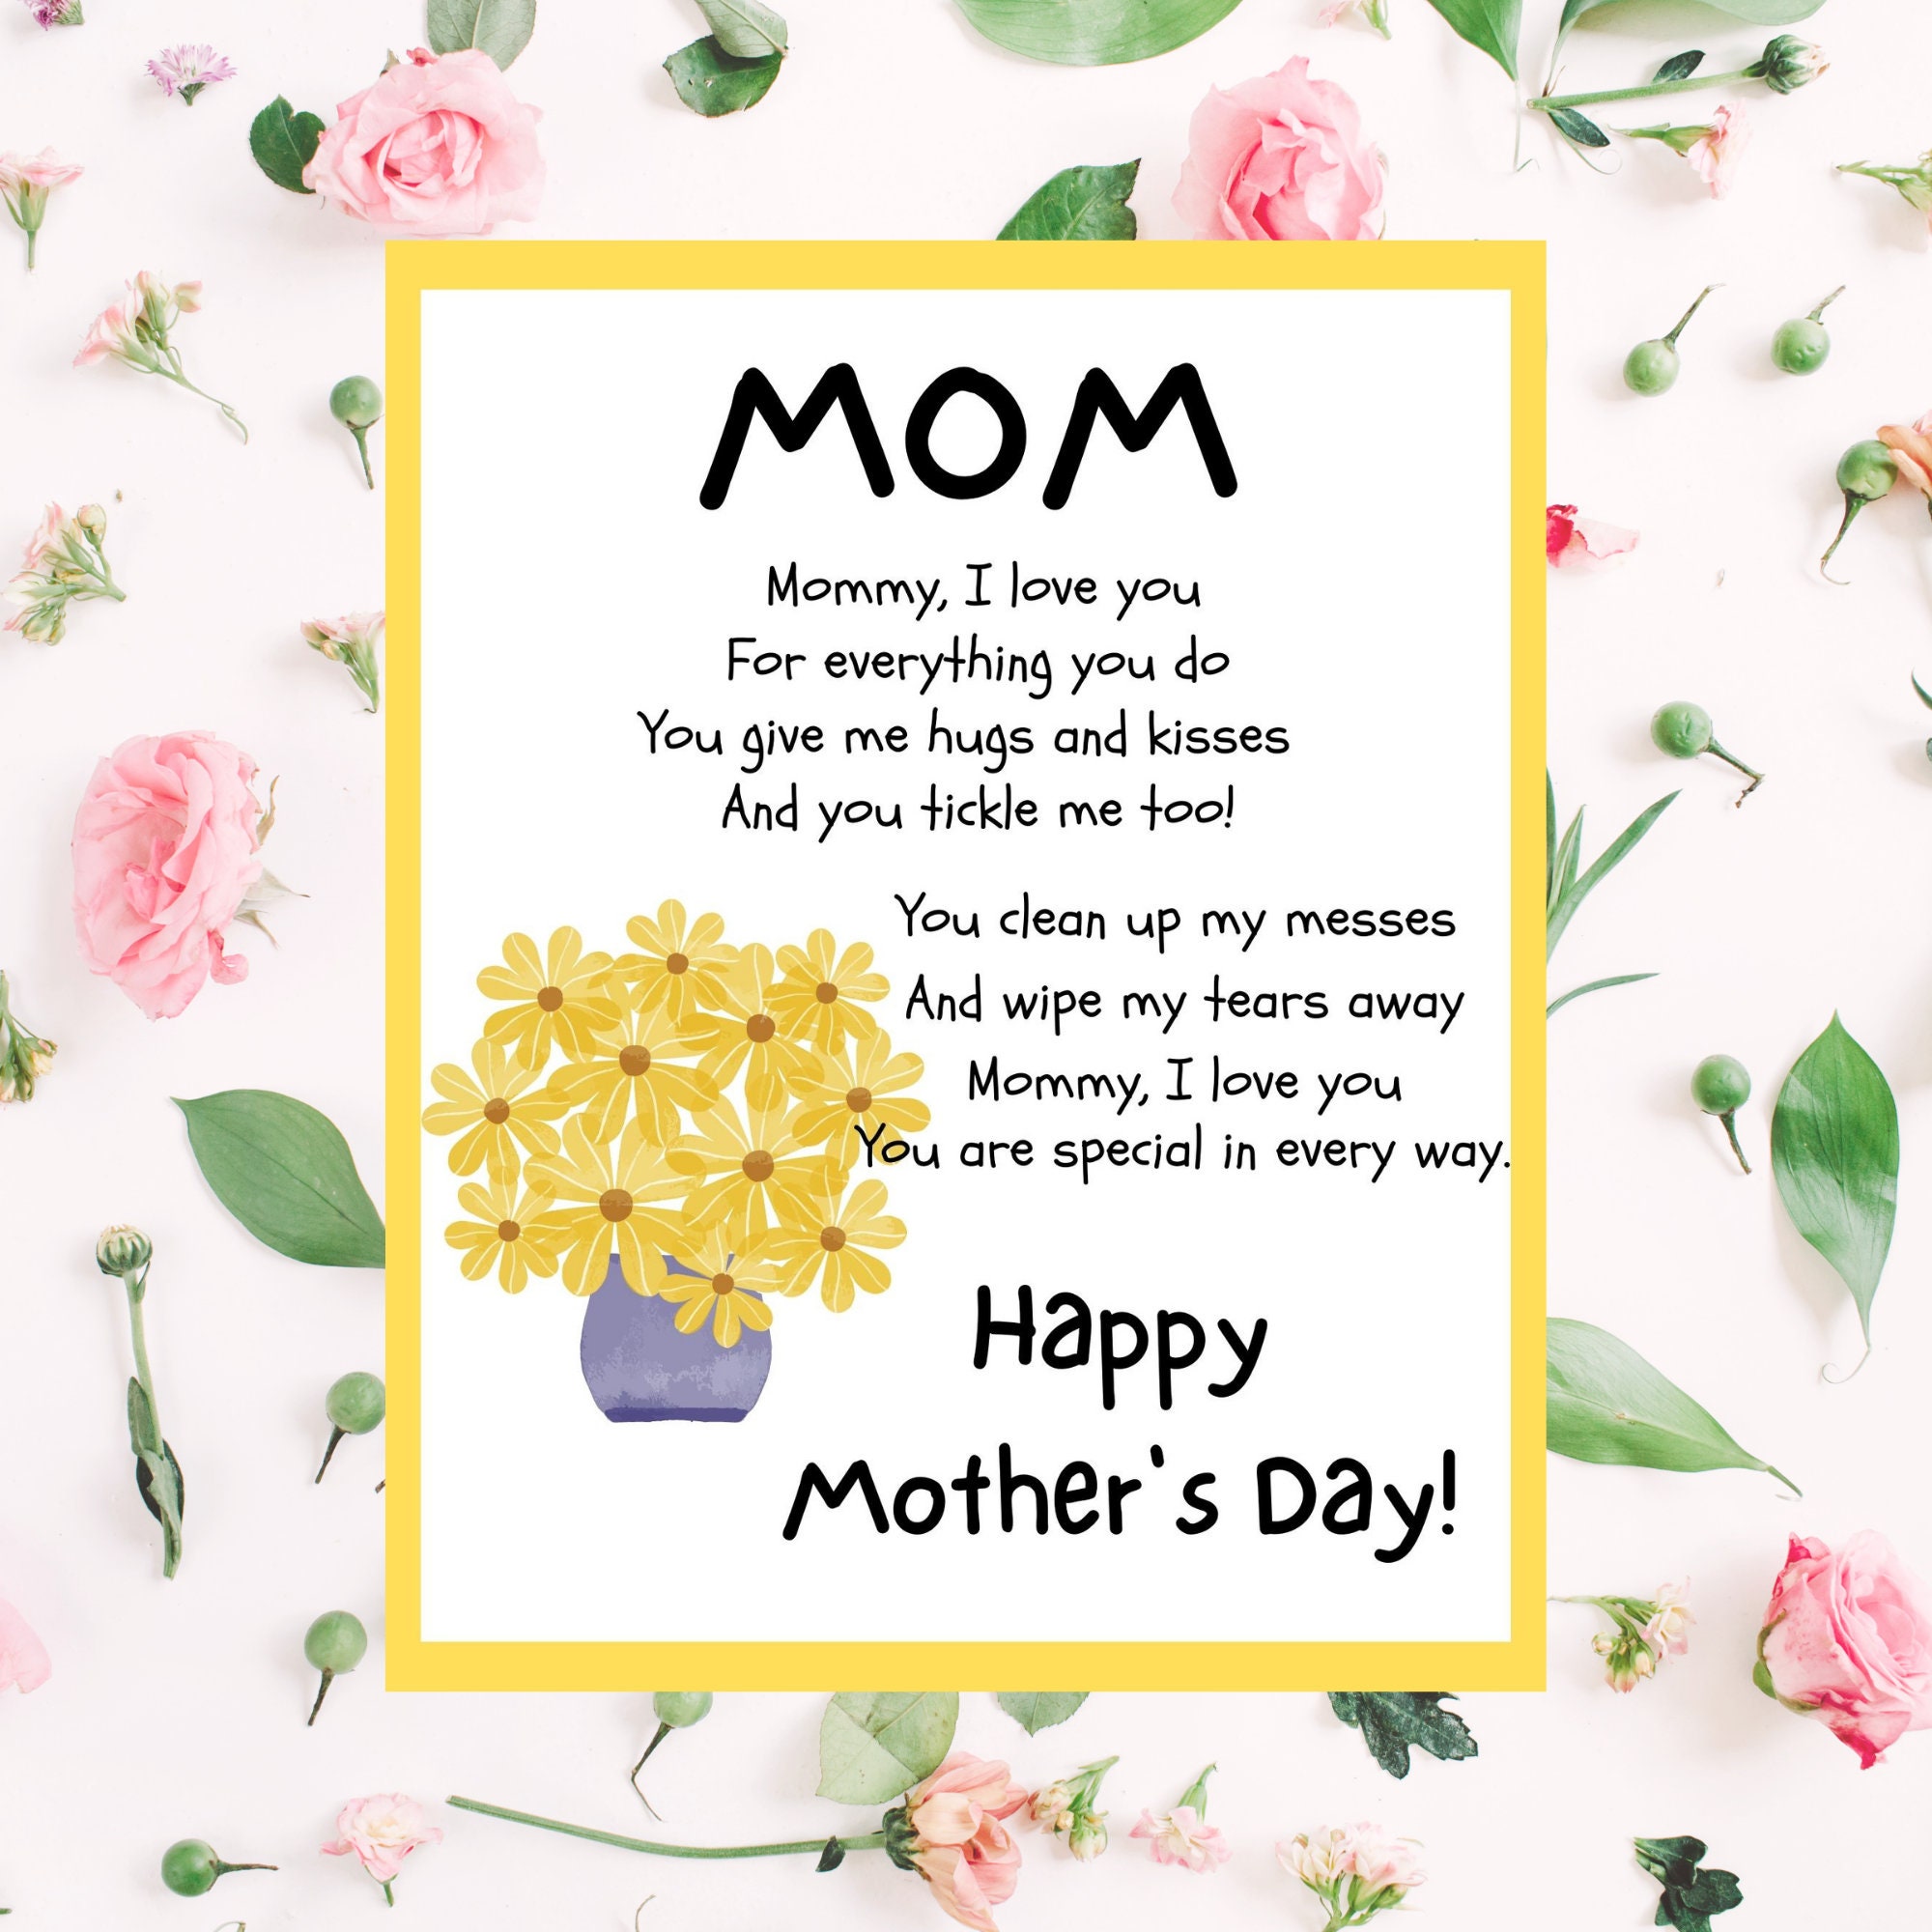 MOM Mother's Day Poem Printable Mother's Day Poem Etsy